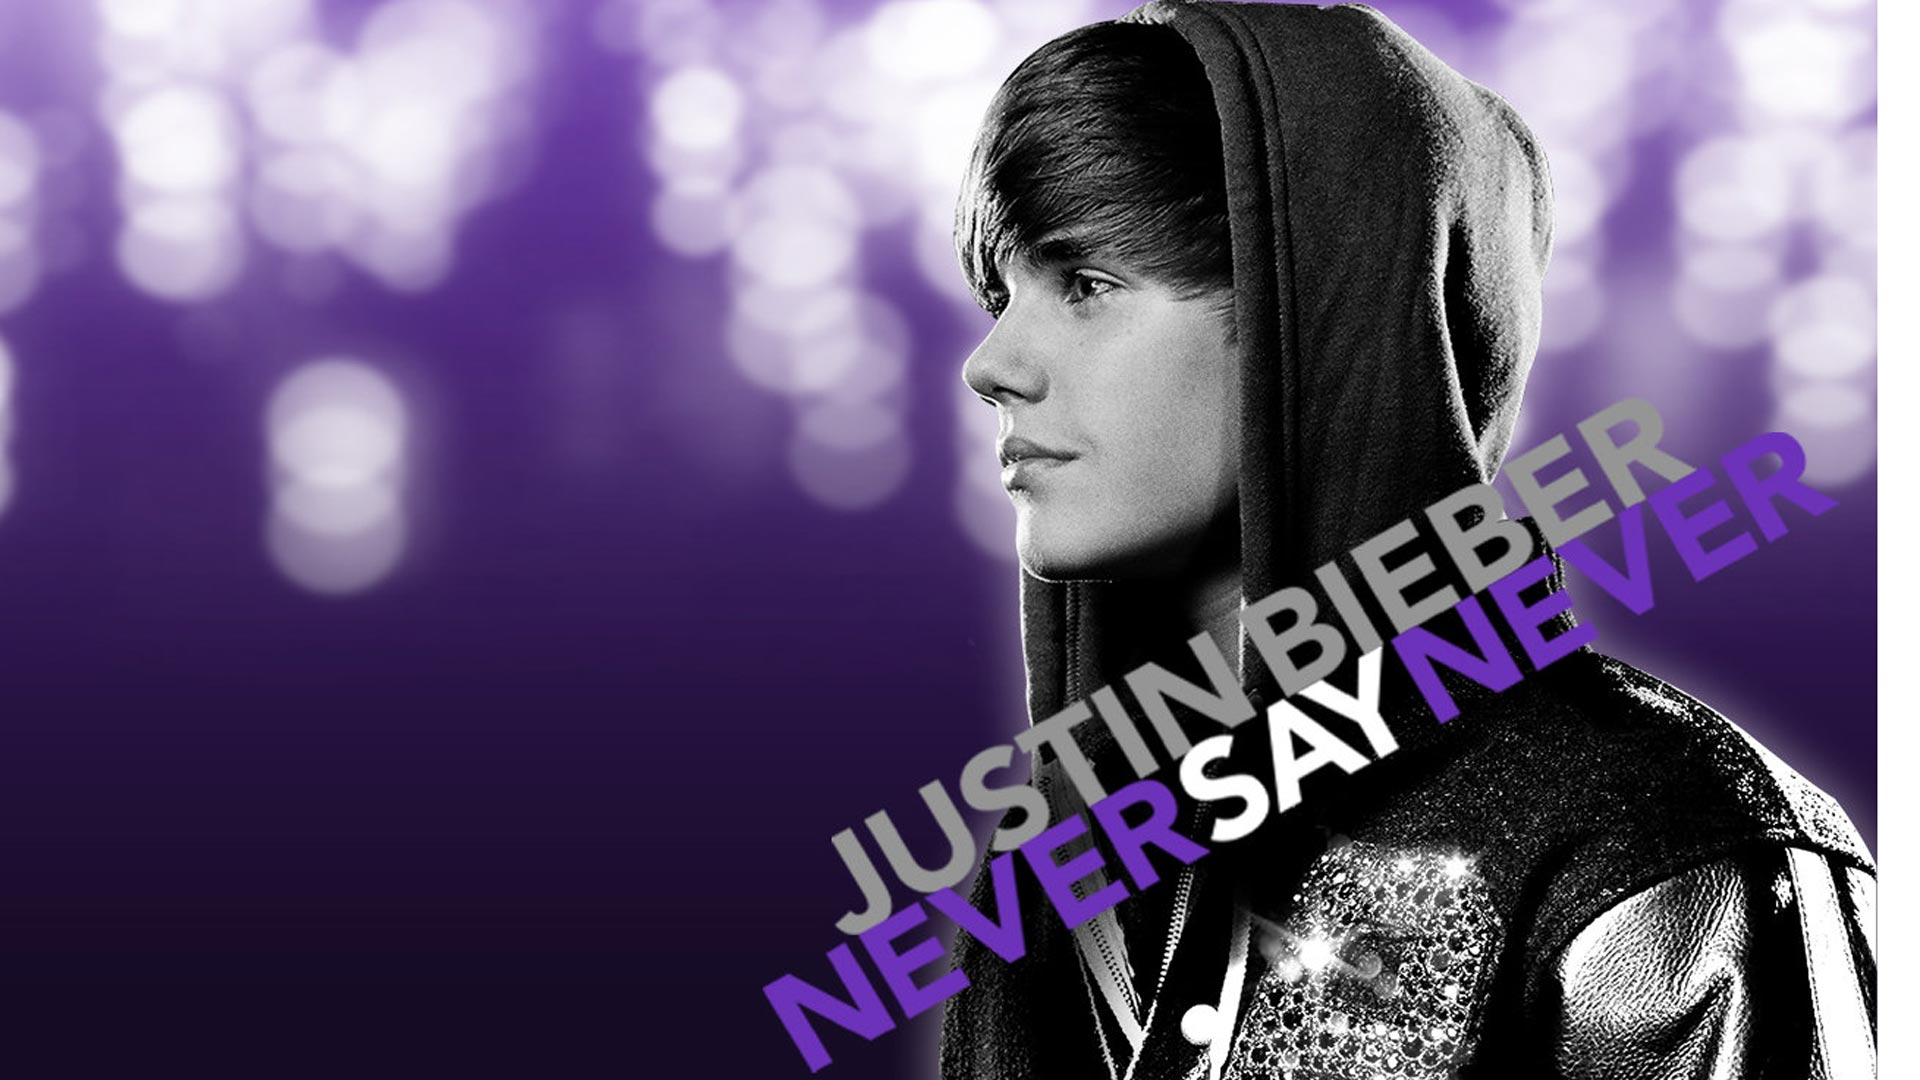  Justin bieber 2013 style hd wallpaper and make this wallpaper for your